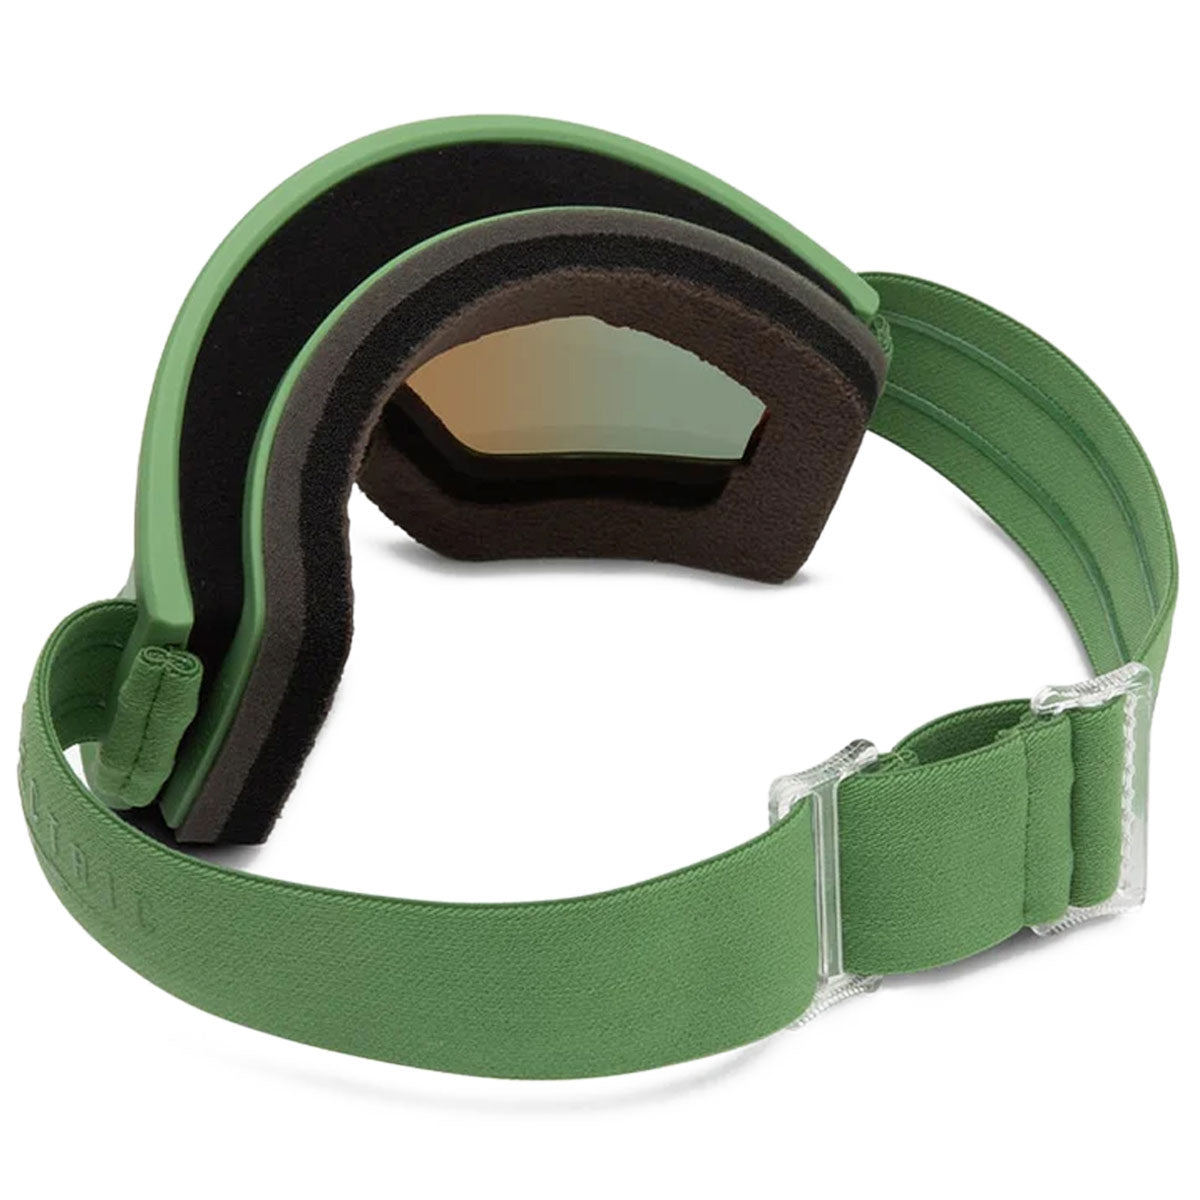 Electric Hex Snowboard Goggles - Matte Moss/Gold Chrome image 2